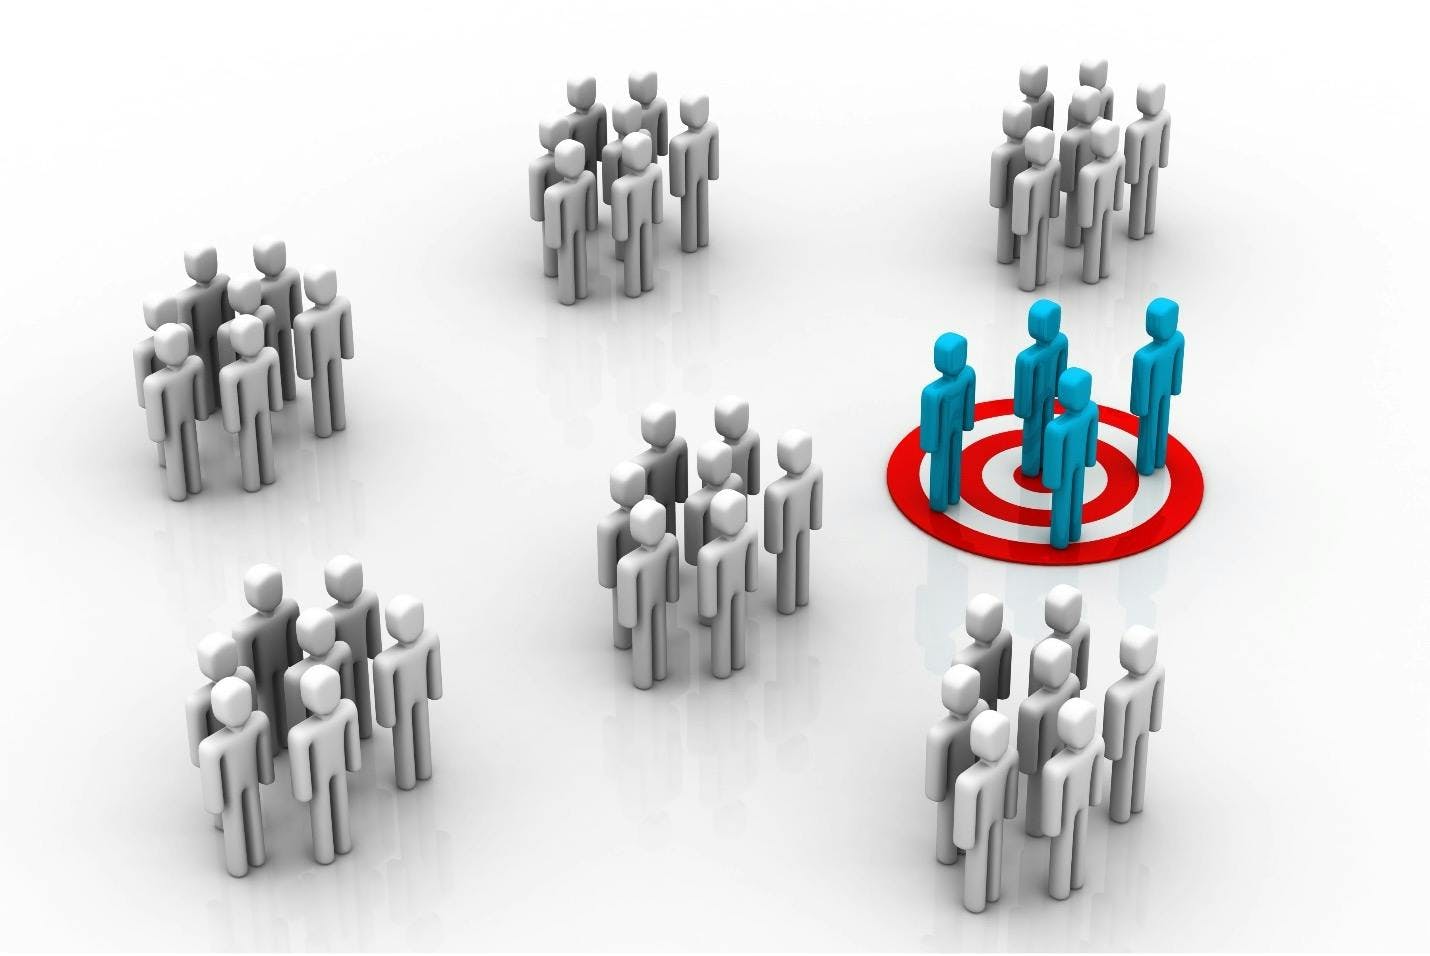 Seven clusters of people grouped together with one of those groups standing over a bullseye, signaling that this cluster of people represents your ideal type of customer. 